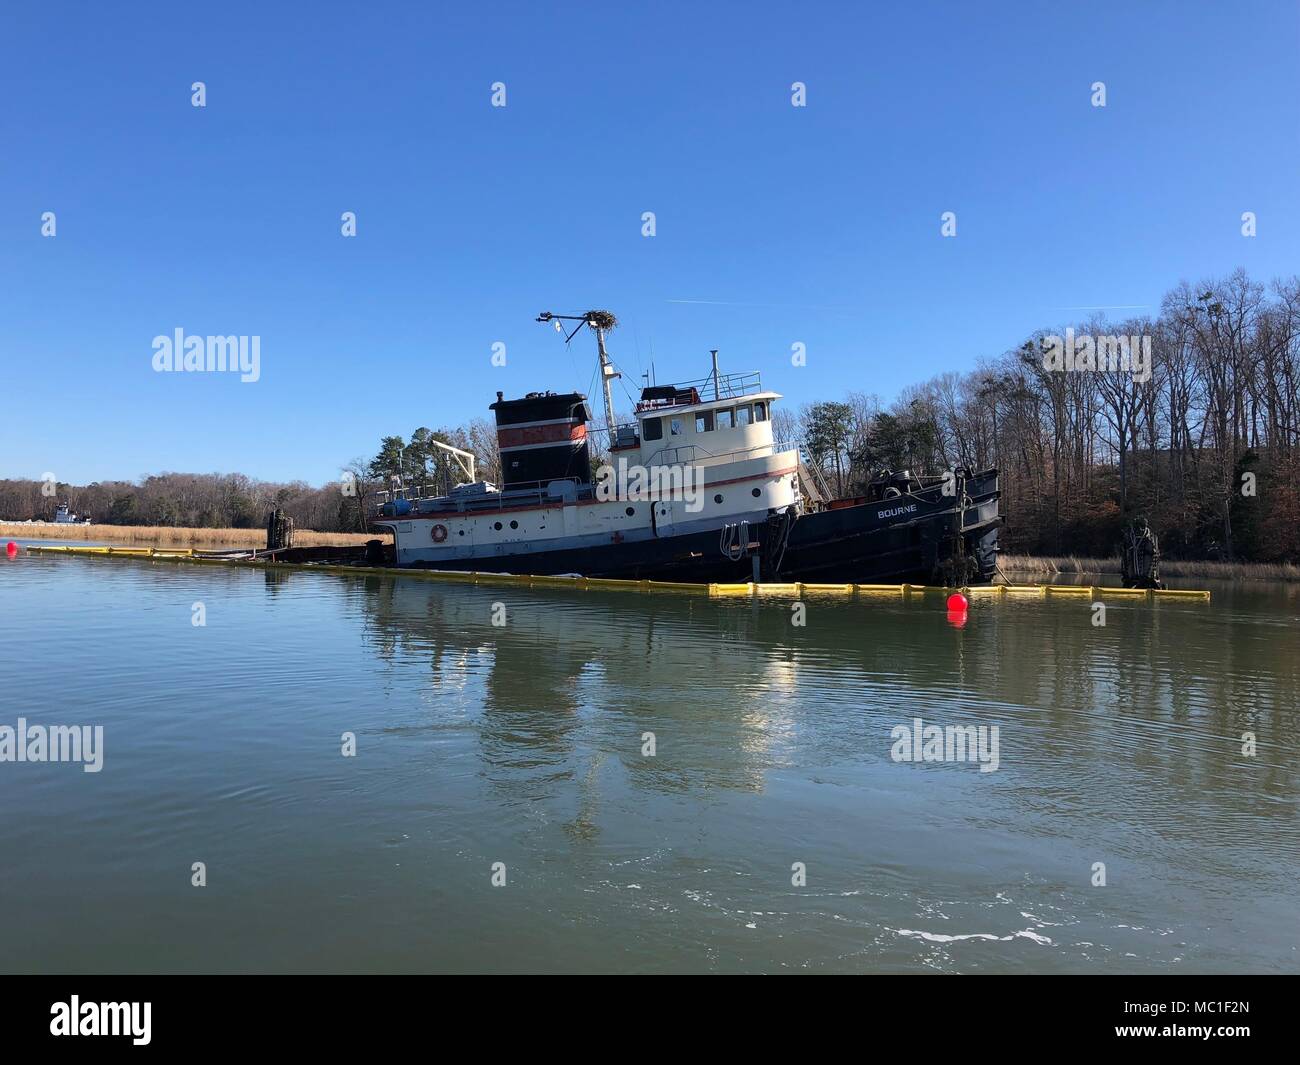 The tugboat Bourne sits partially submerged on Skiffes Creek in Newport News, Virginia, Jan. 22, 2018. The boat discharged approximately 5 to 10 gallons of motor oil, which was contained by the Coast Guard, the Newport News Hazardous Materials Team and the Virginia Department of Emergency Management with absorbent pads and a floating barrier. (U.S. Coast Guard photo by Lt. j.g. Stasia Ellis) Stock Photo